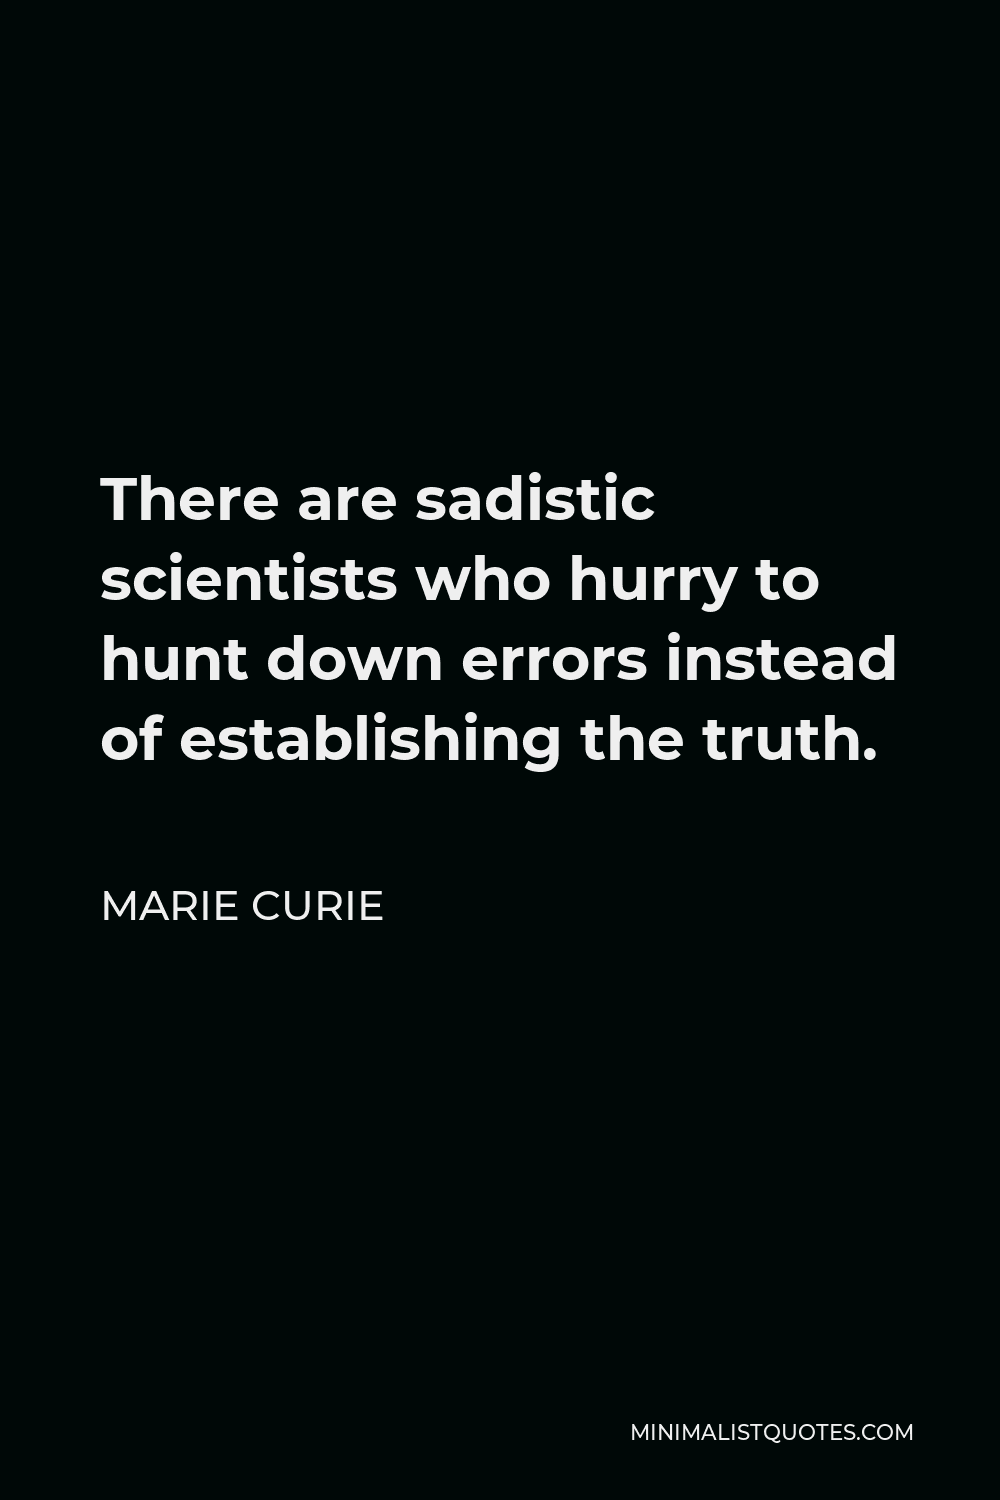 Marie Curie Quote - There are sadistic scientists who hurry to hunt down errors instead of establishing the truth.